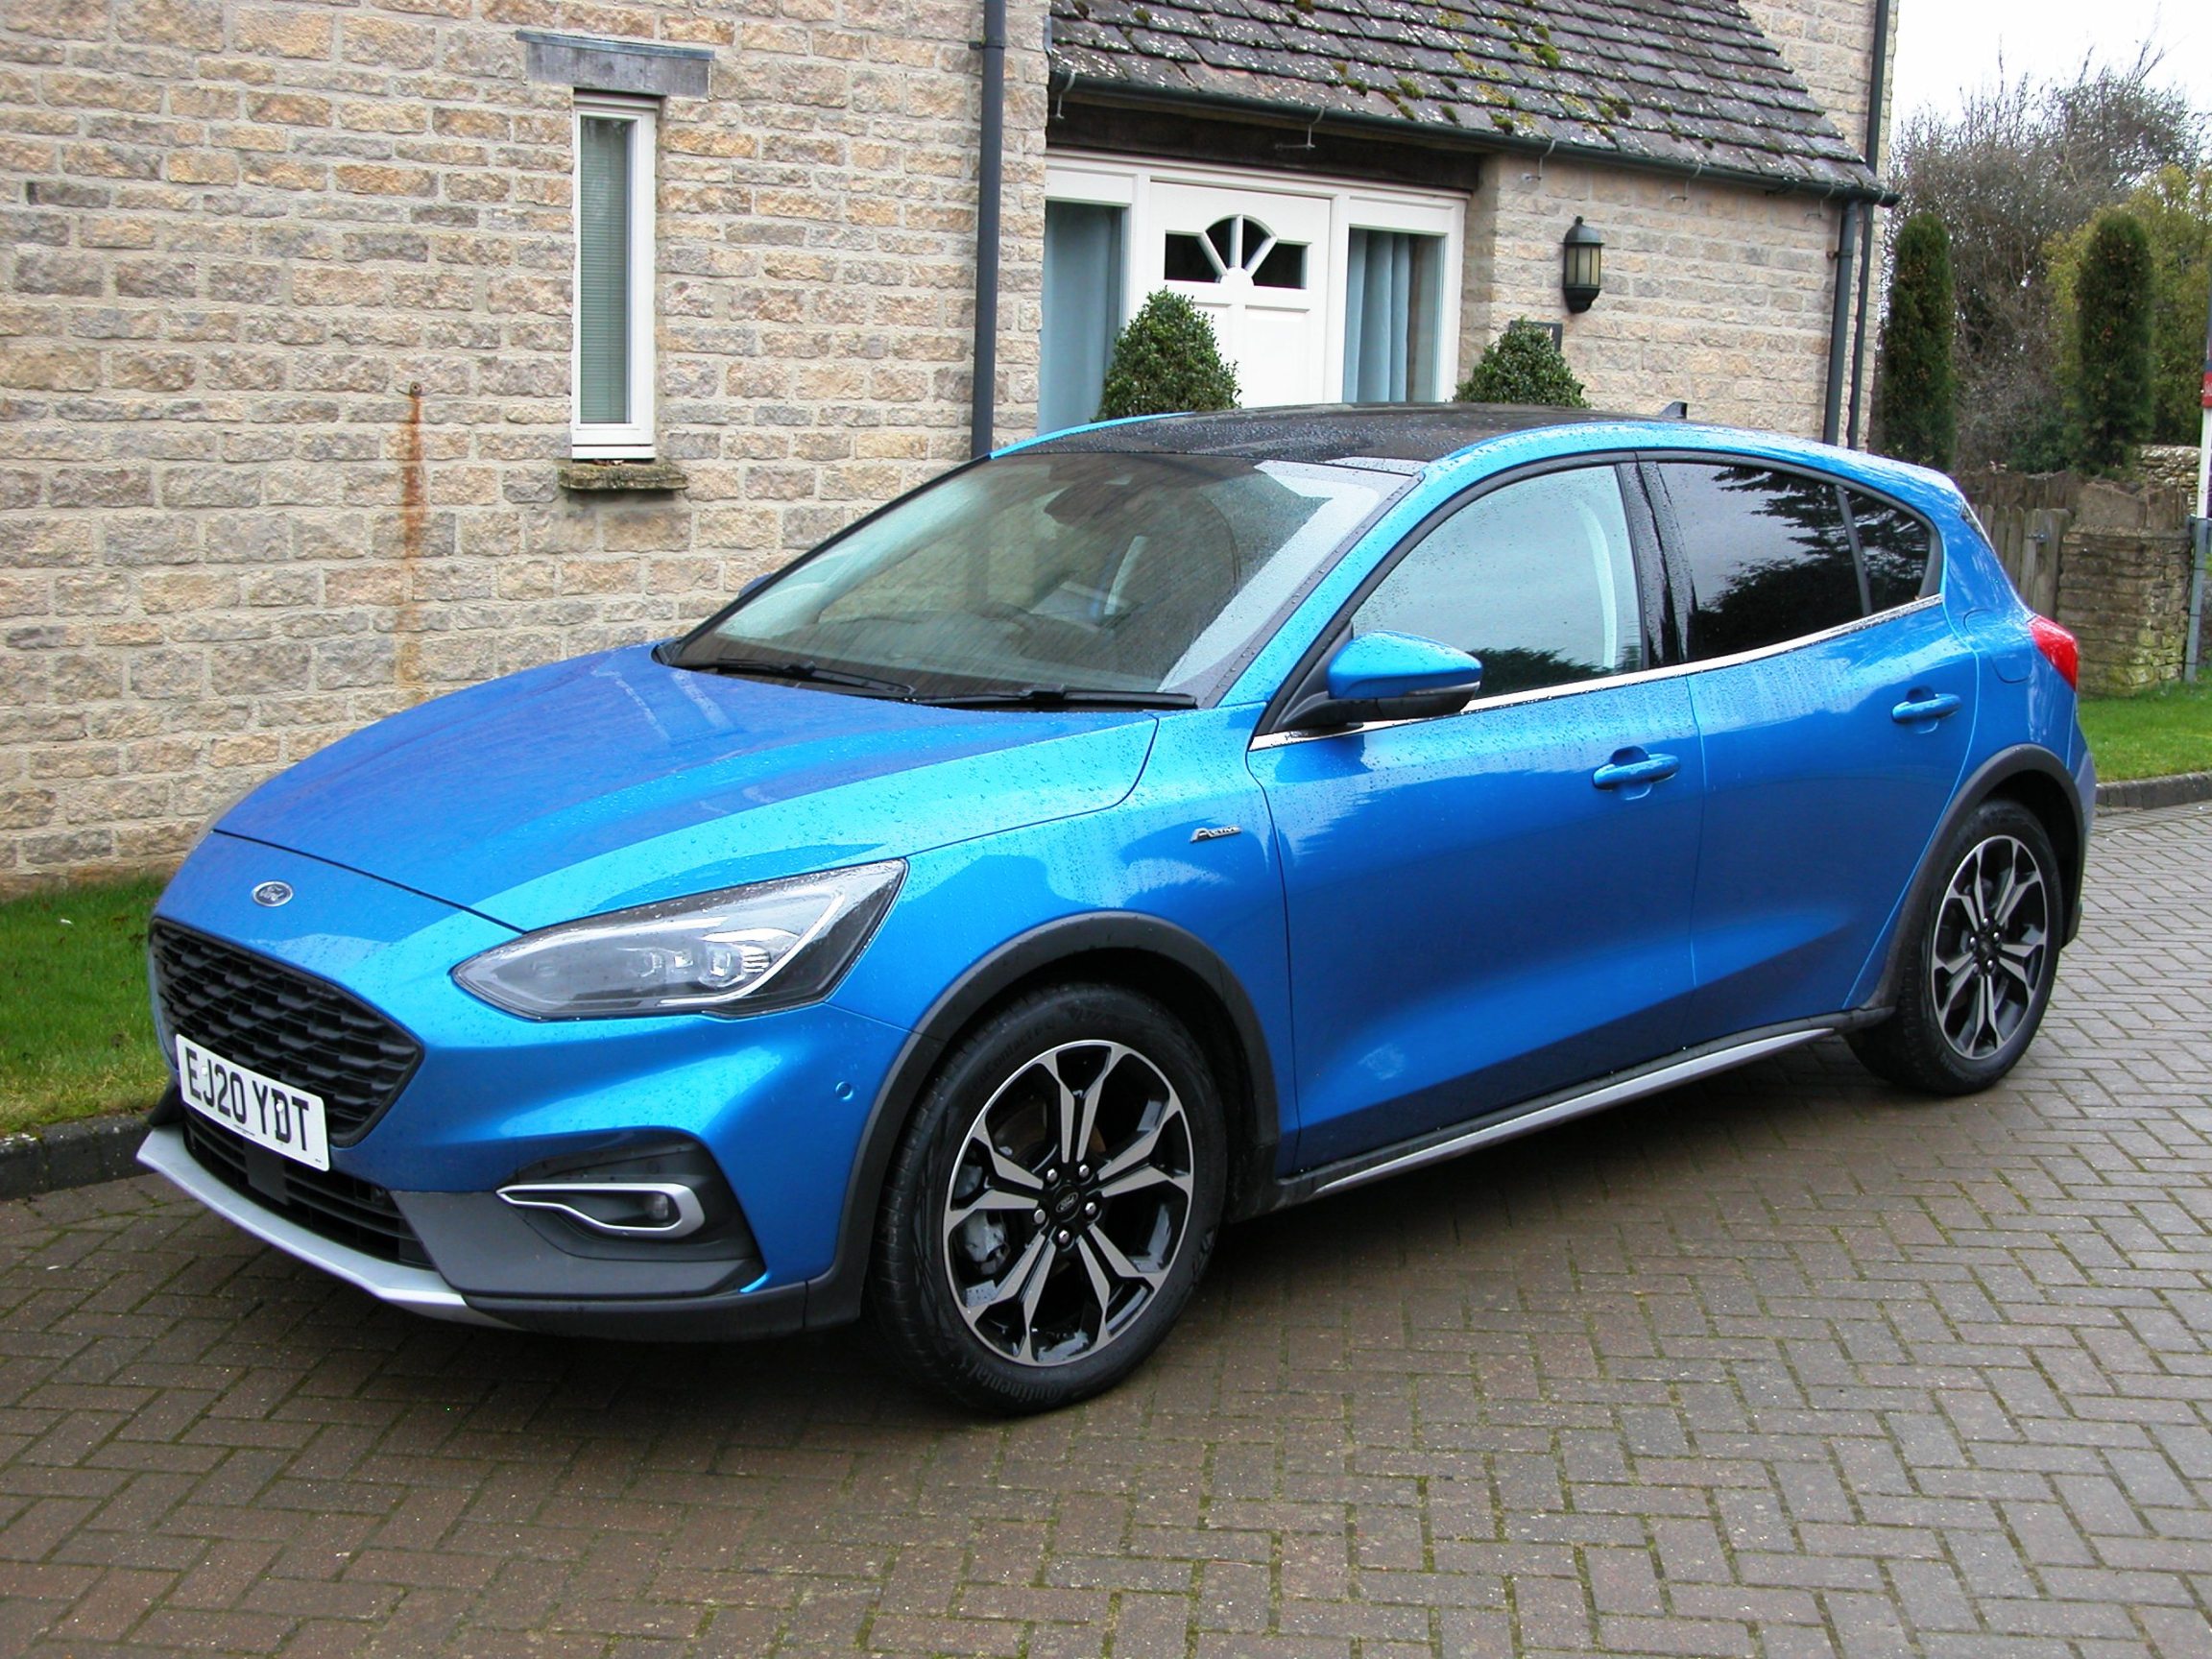 https://www.wheels-alive.co.uk/wp-content/uploads/2021/02/Ford-Focus-1.0-mHEV-Active-X-Vignale-side-front-static-view.jpg